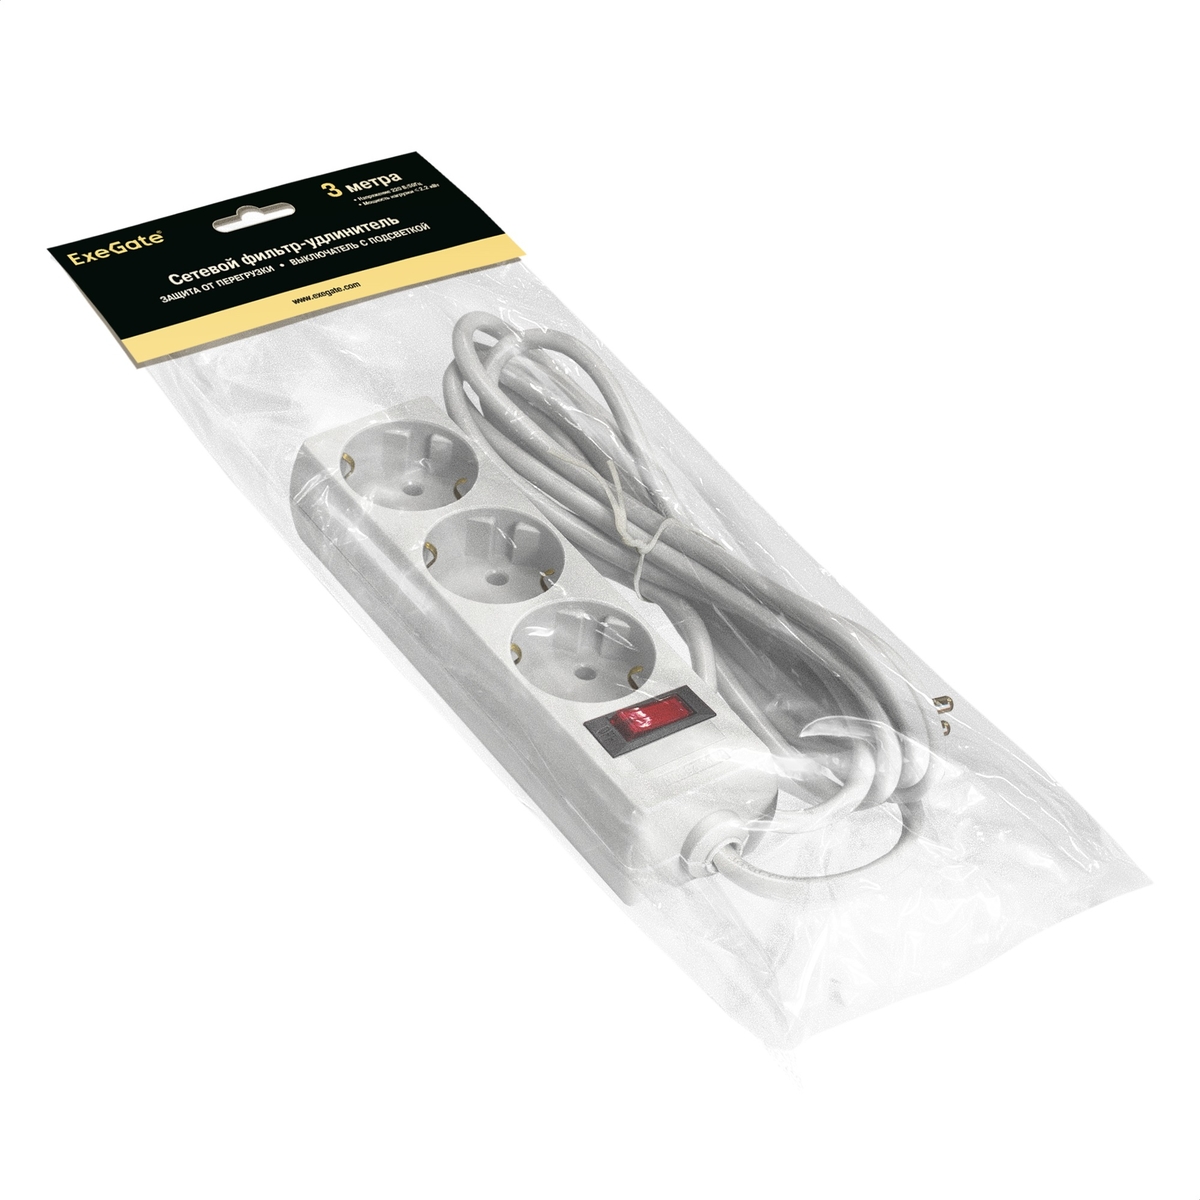 Surge protector ExeGate SP-3-3W